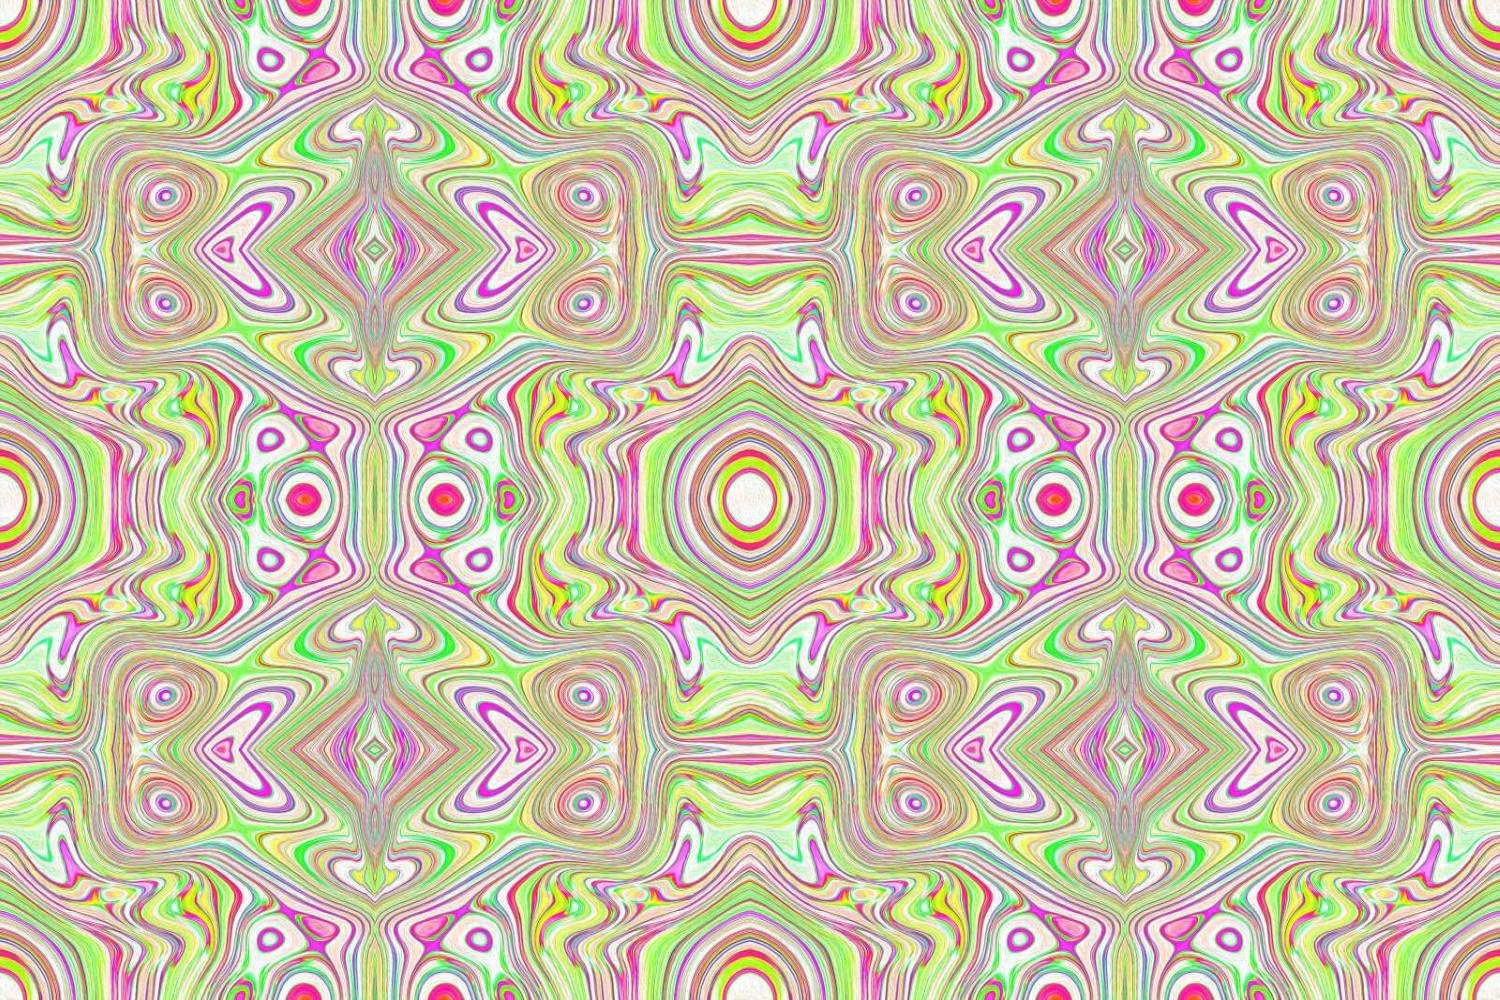 Trippy Retro Pink and Lime Green Abstract Pattern